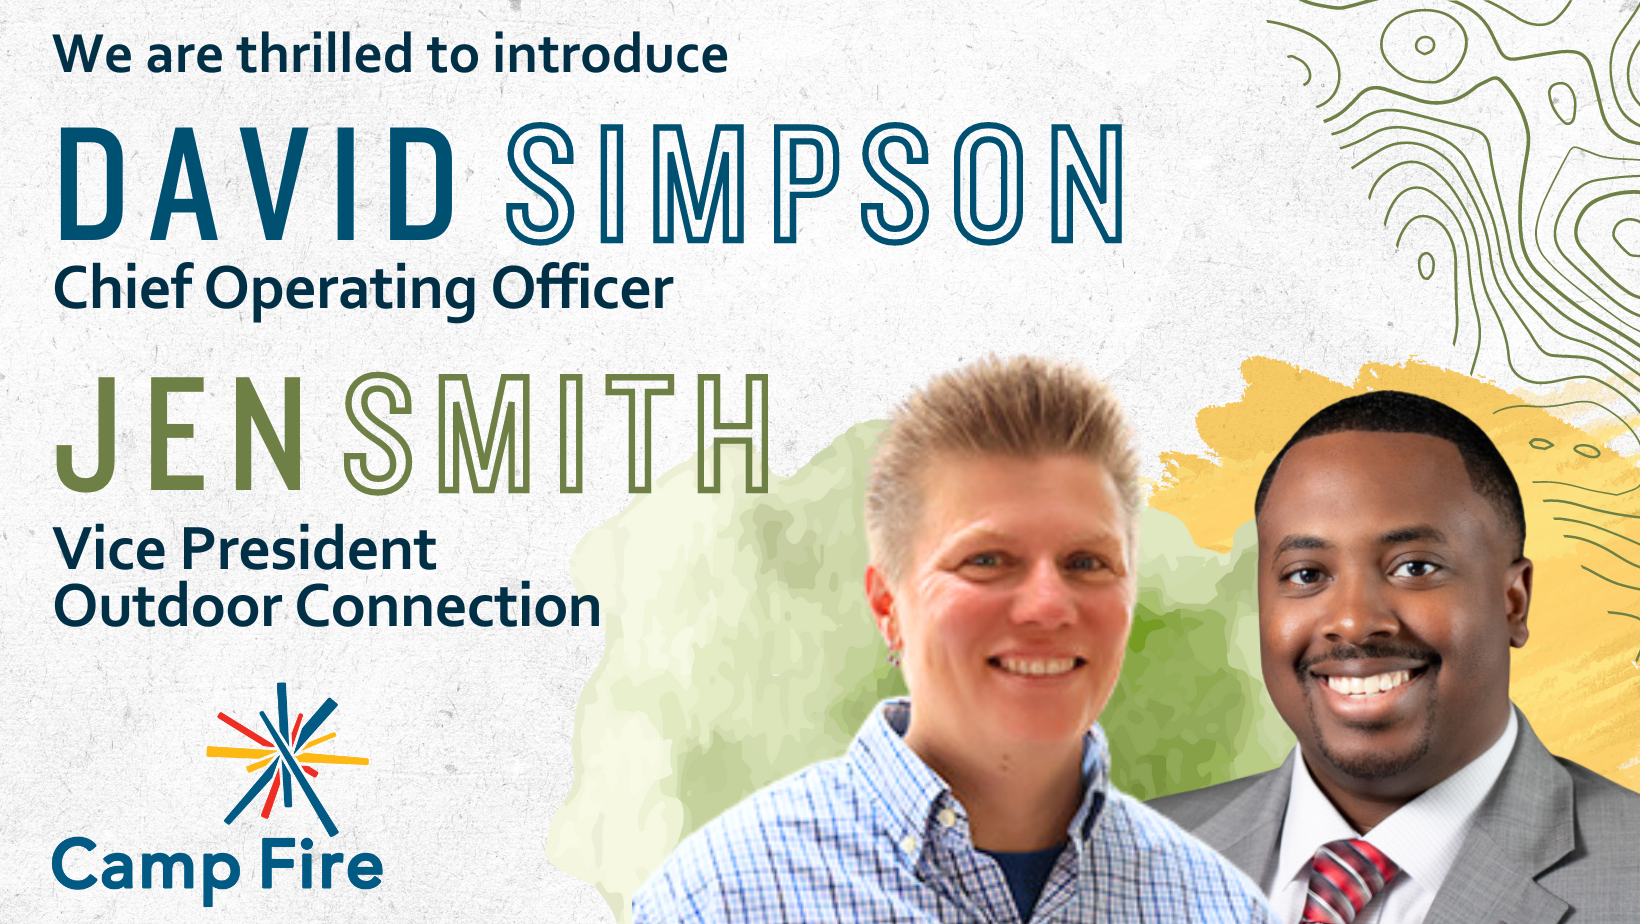 graphic with text We are thrilled to introduce David Simpson, Chief Operating Officer and Jen Smith Vice President Outdoor Connection with headshot photos of both